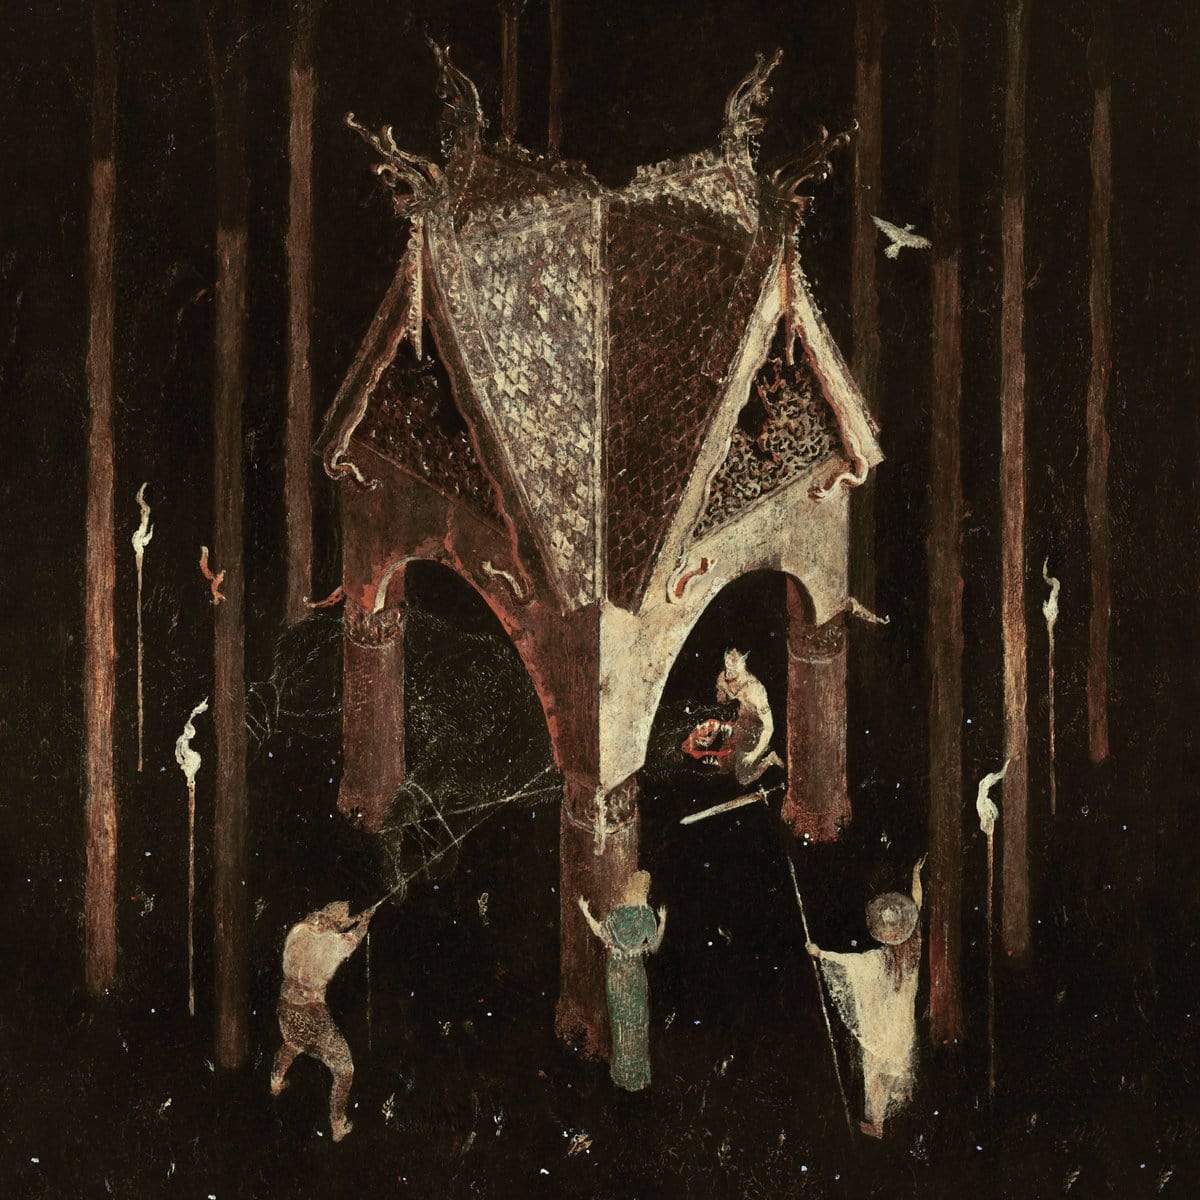 Artemisia Records Vinyl Wolves in the Throne Room "Thrice Woven" DLP